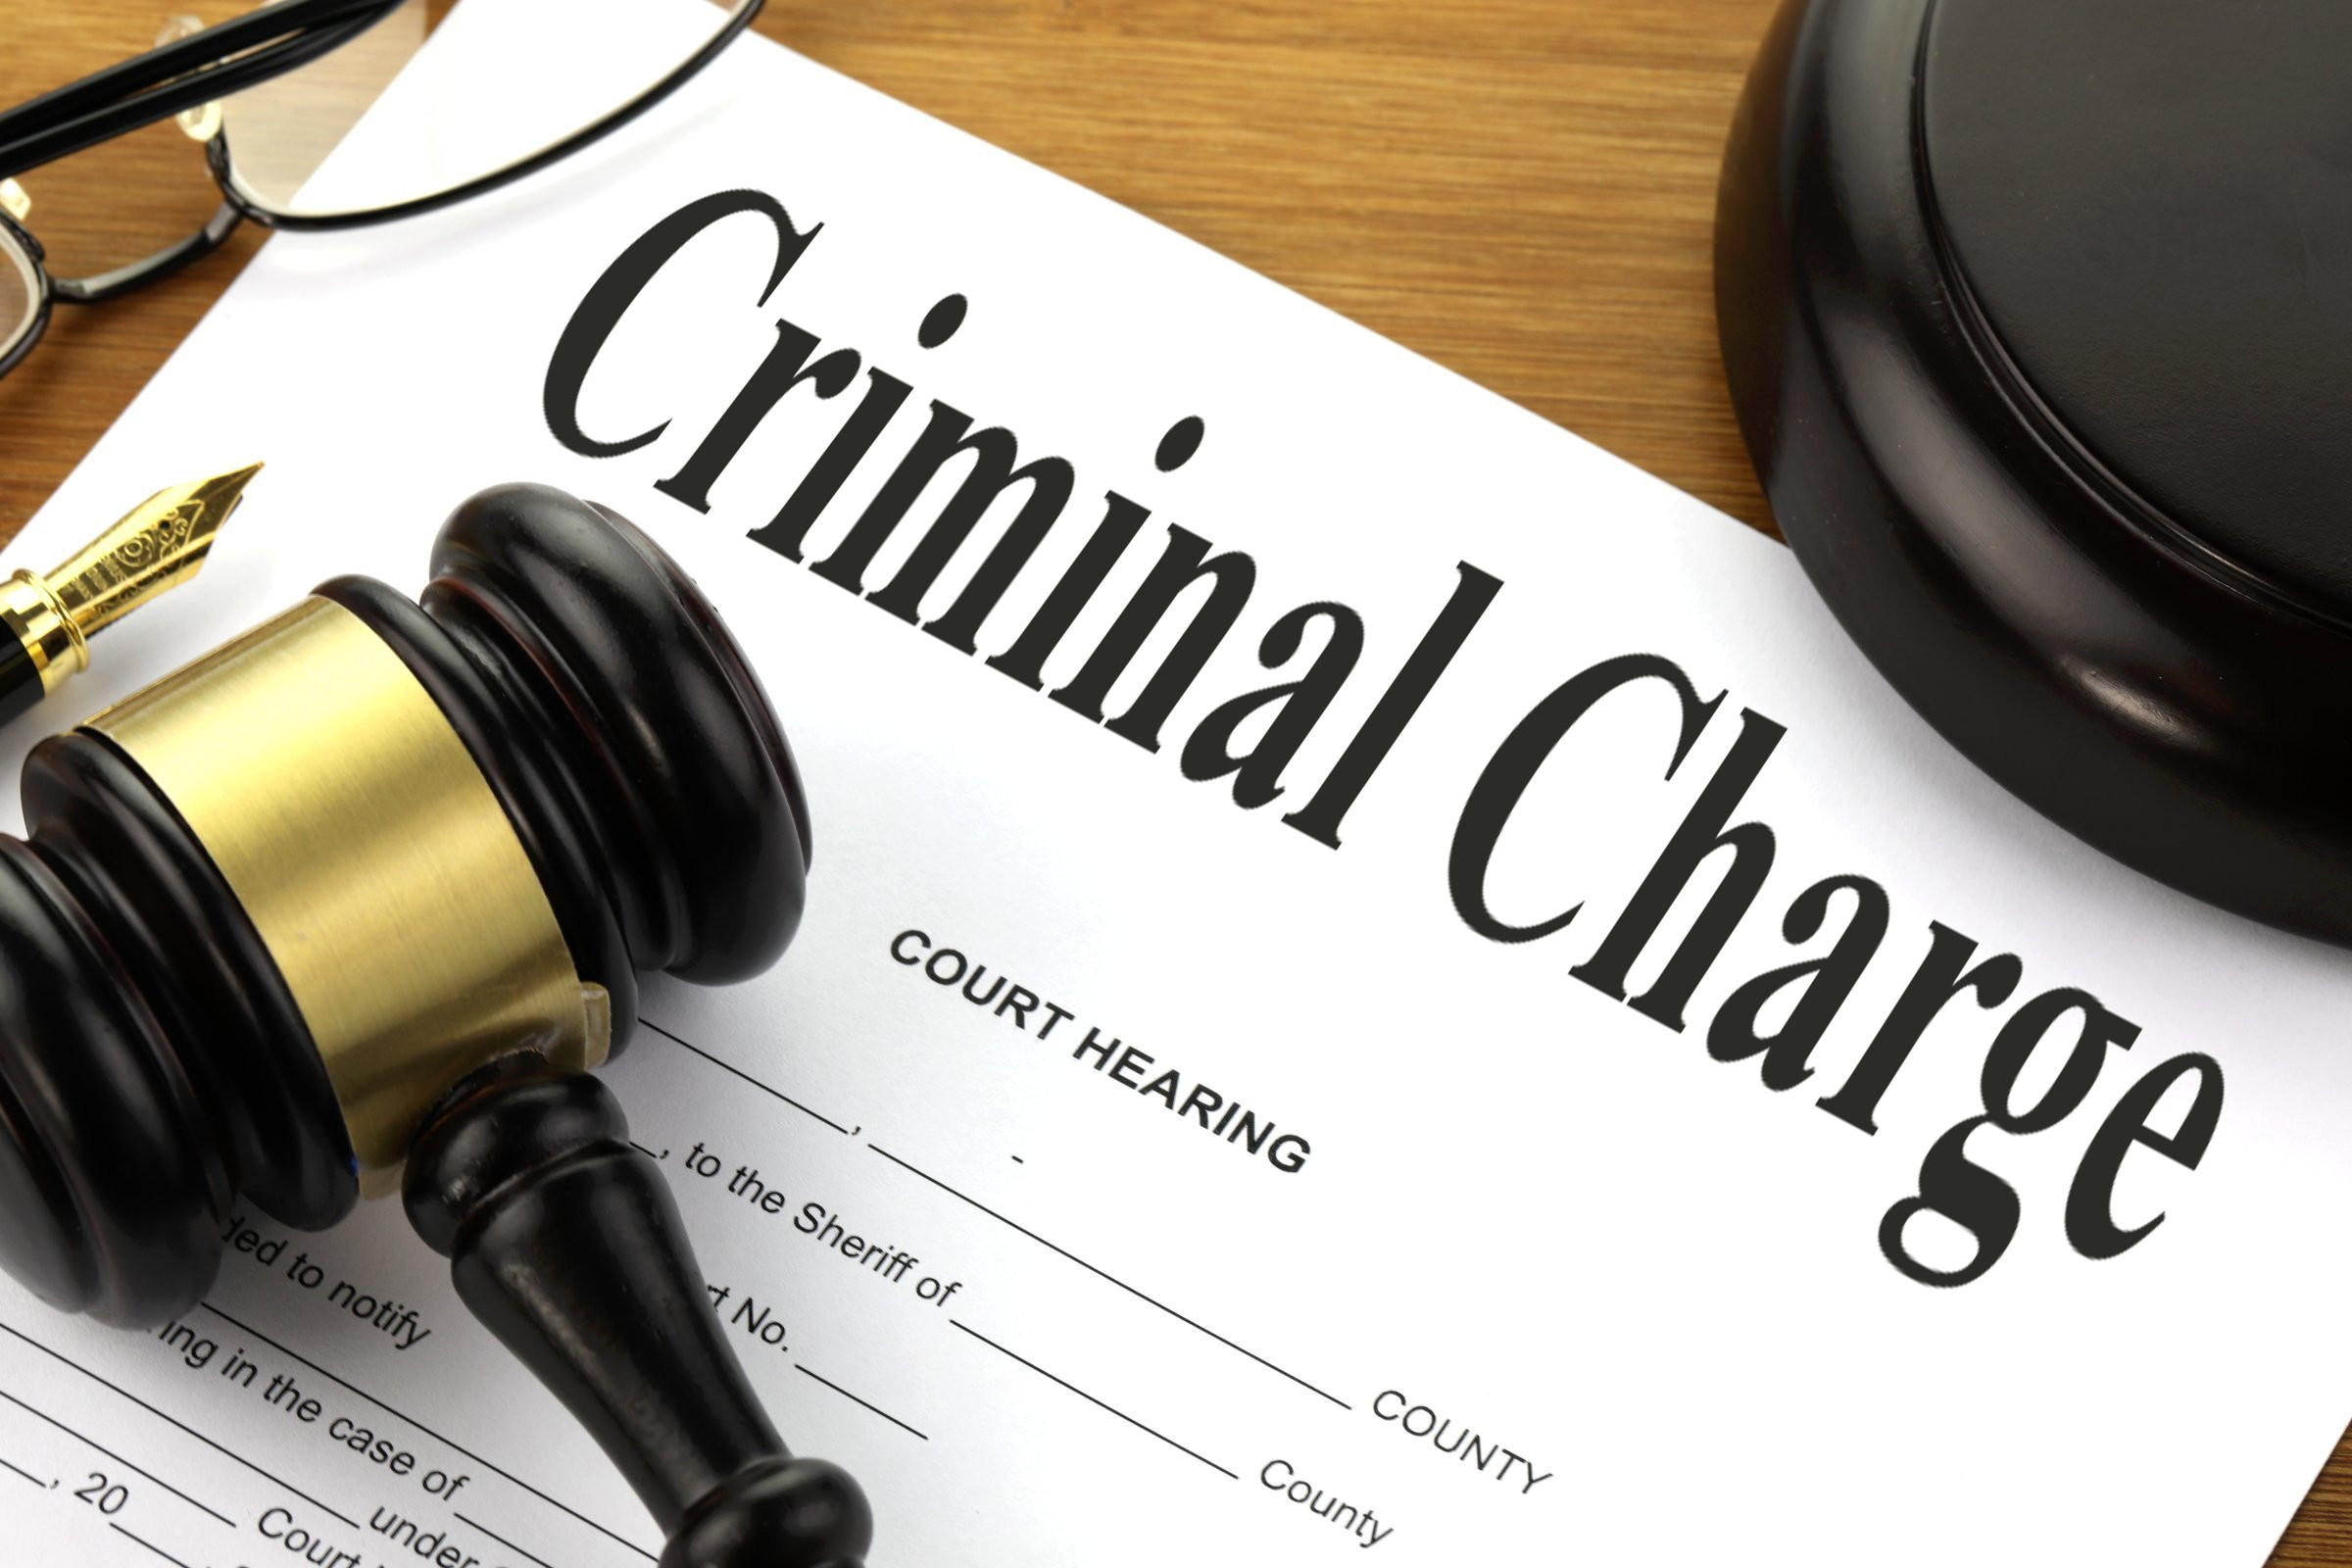 Free Of Charge Creative Commons Criminal Charge Image Legal 1